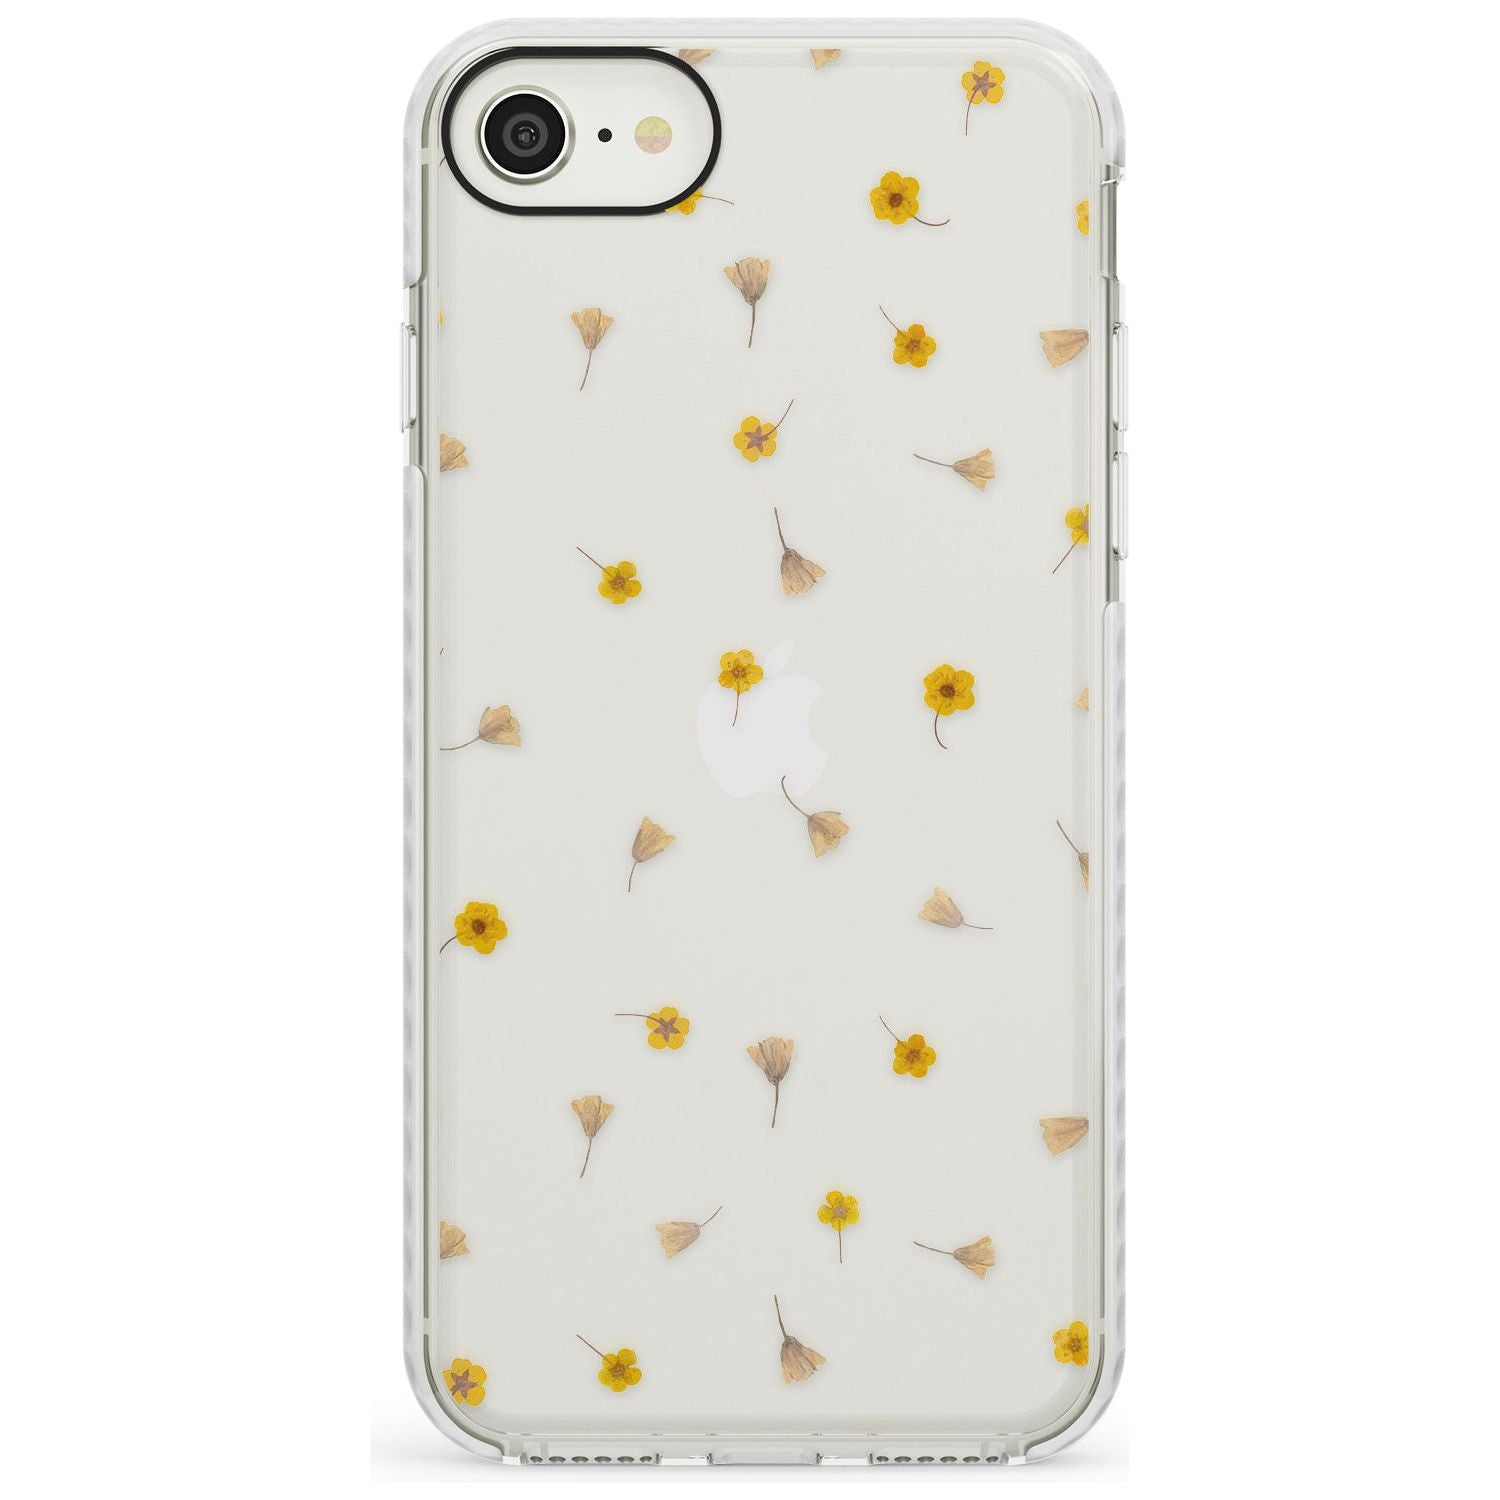 Small Flower Mix - Dried Flower-Inspired Design Impact Phone Case for iPhone SE 8 7 Plus